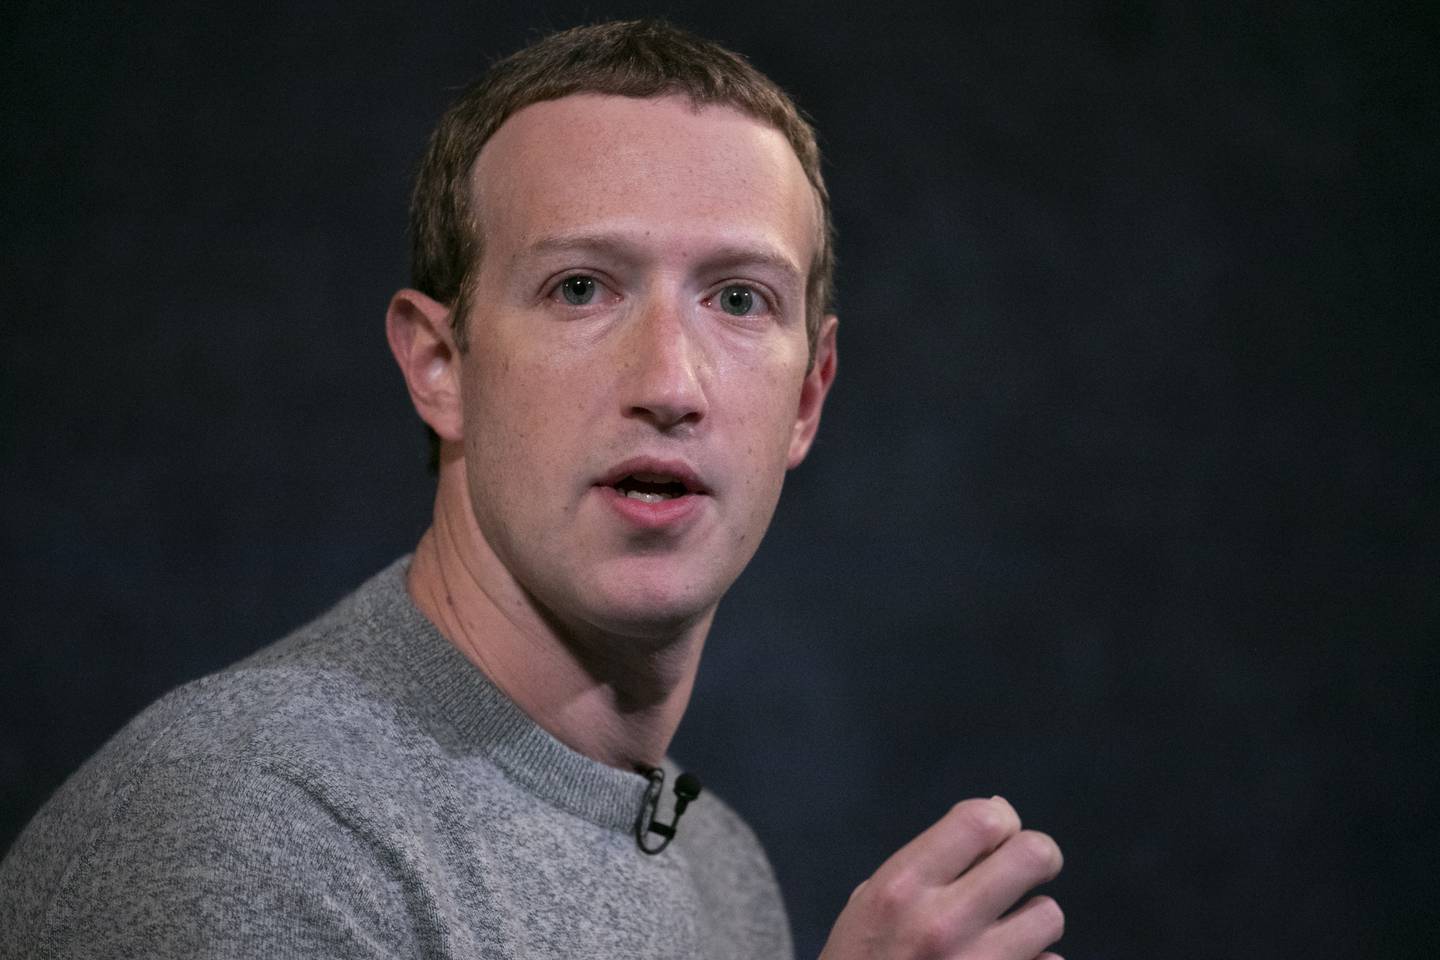 Facebook chief executive Mark Zuckerberg speaks at the Paley Center in New York.  Newly unredacted documents from a state-led antitrust lawsuit against Google accuse the search giant of colluding with rival Facebook to manipulate online advertising sales. AP